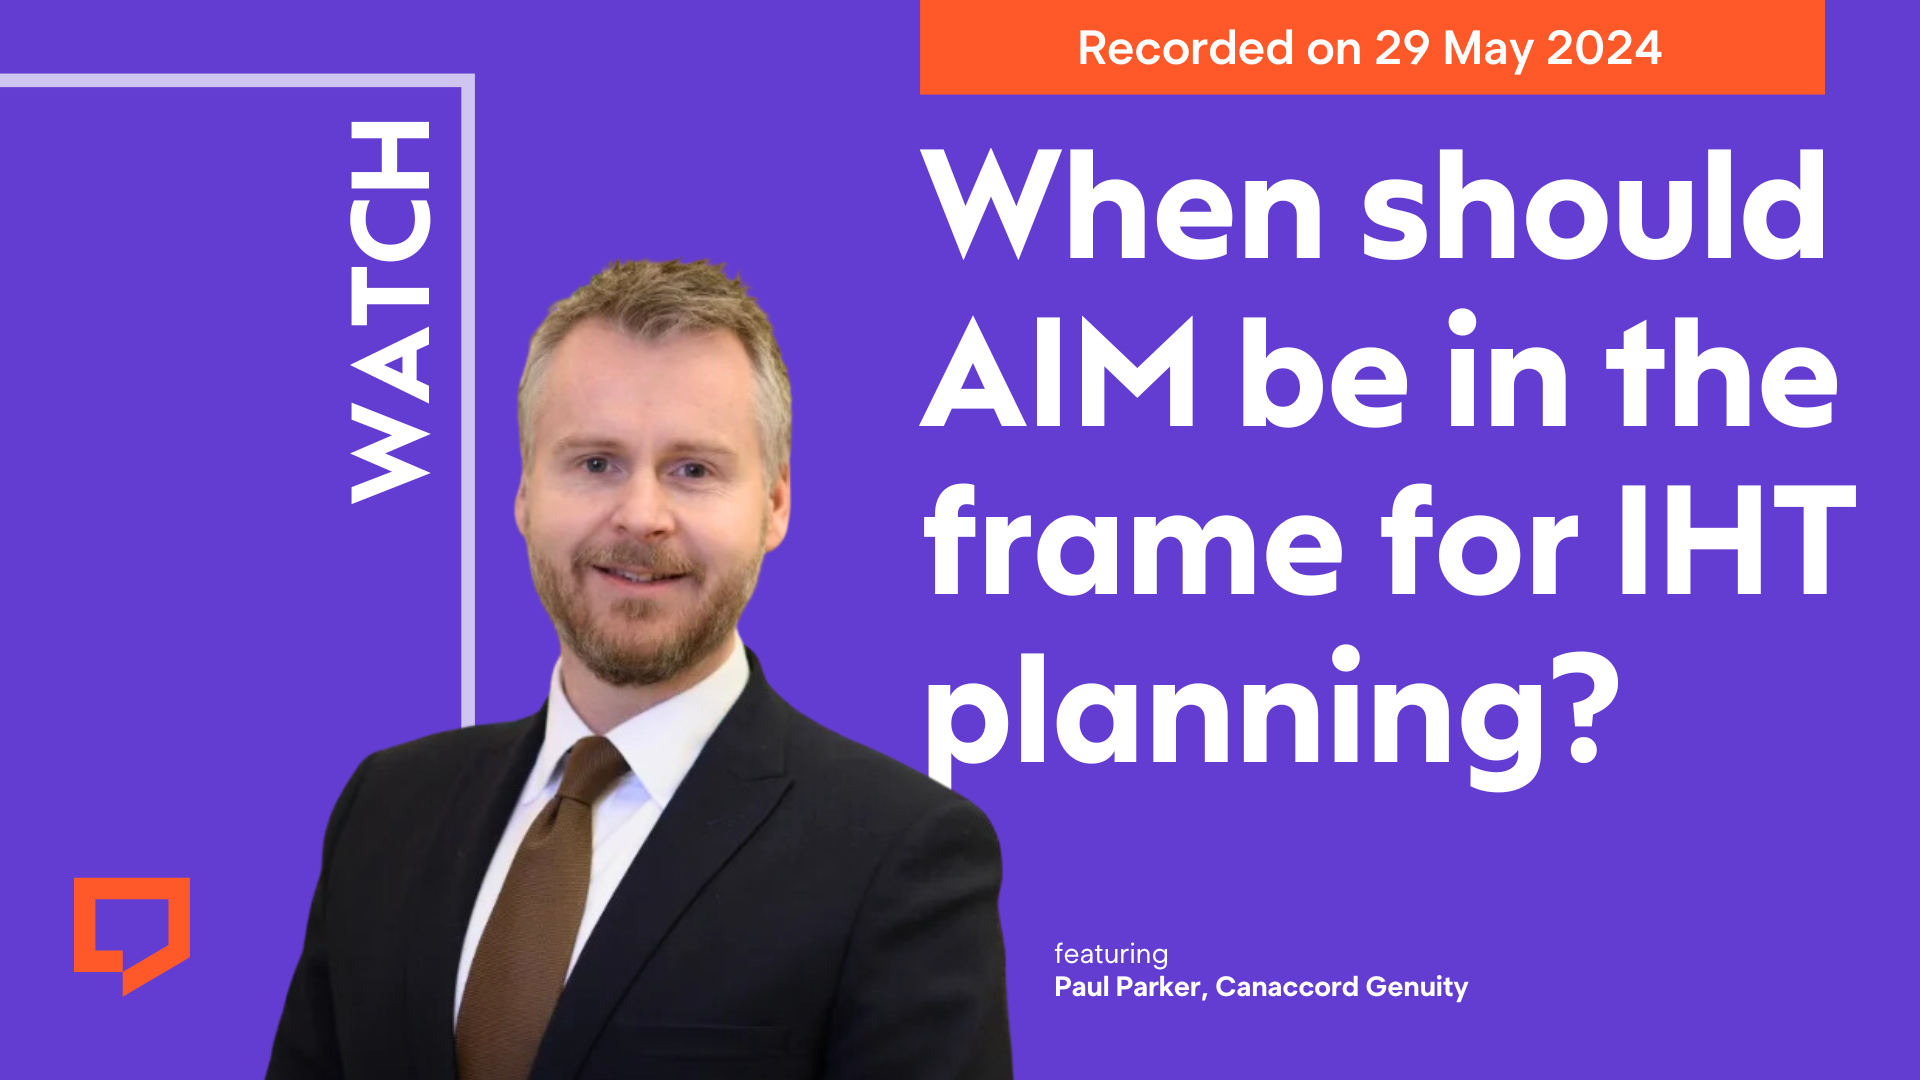 Watch When should AIM be in the frame for IHT planning?' featuring Paul Parker of Canaccord Genuity. Recorded on 29 May 2024.